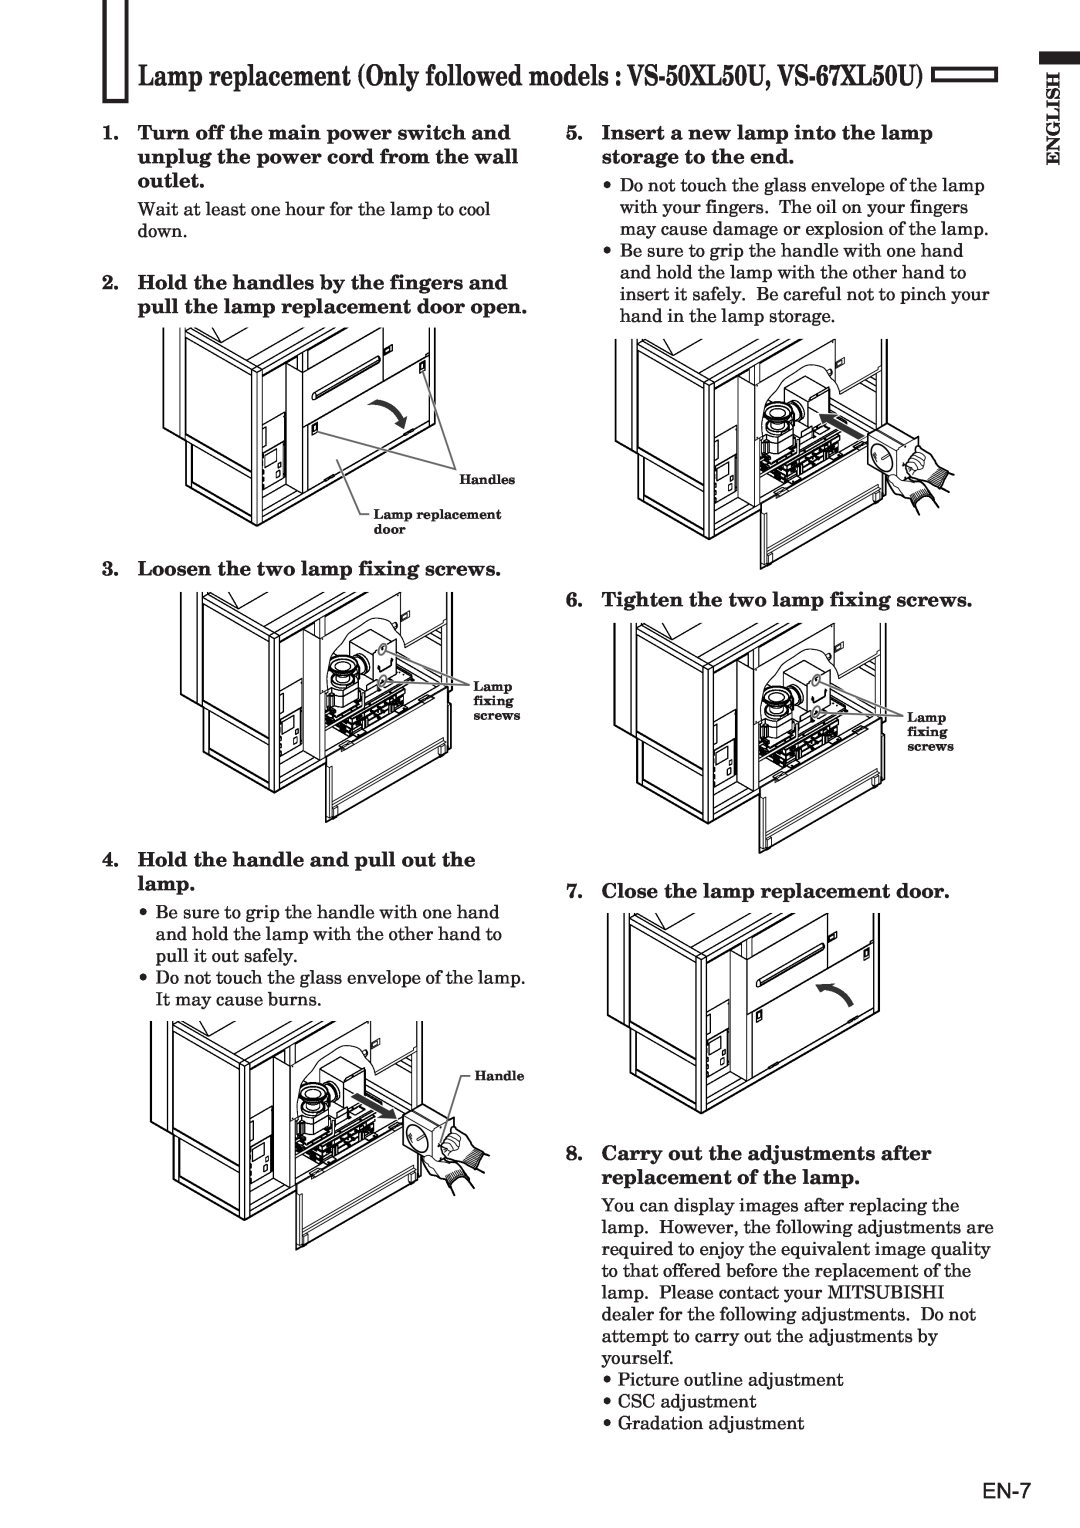 Mitsubishi Electronics VS-50XL50U user manual EN-7, Insert a new lamp into the lamp storage to the end, English 